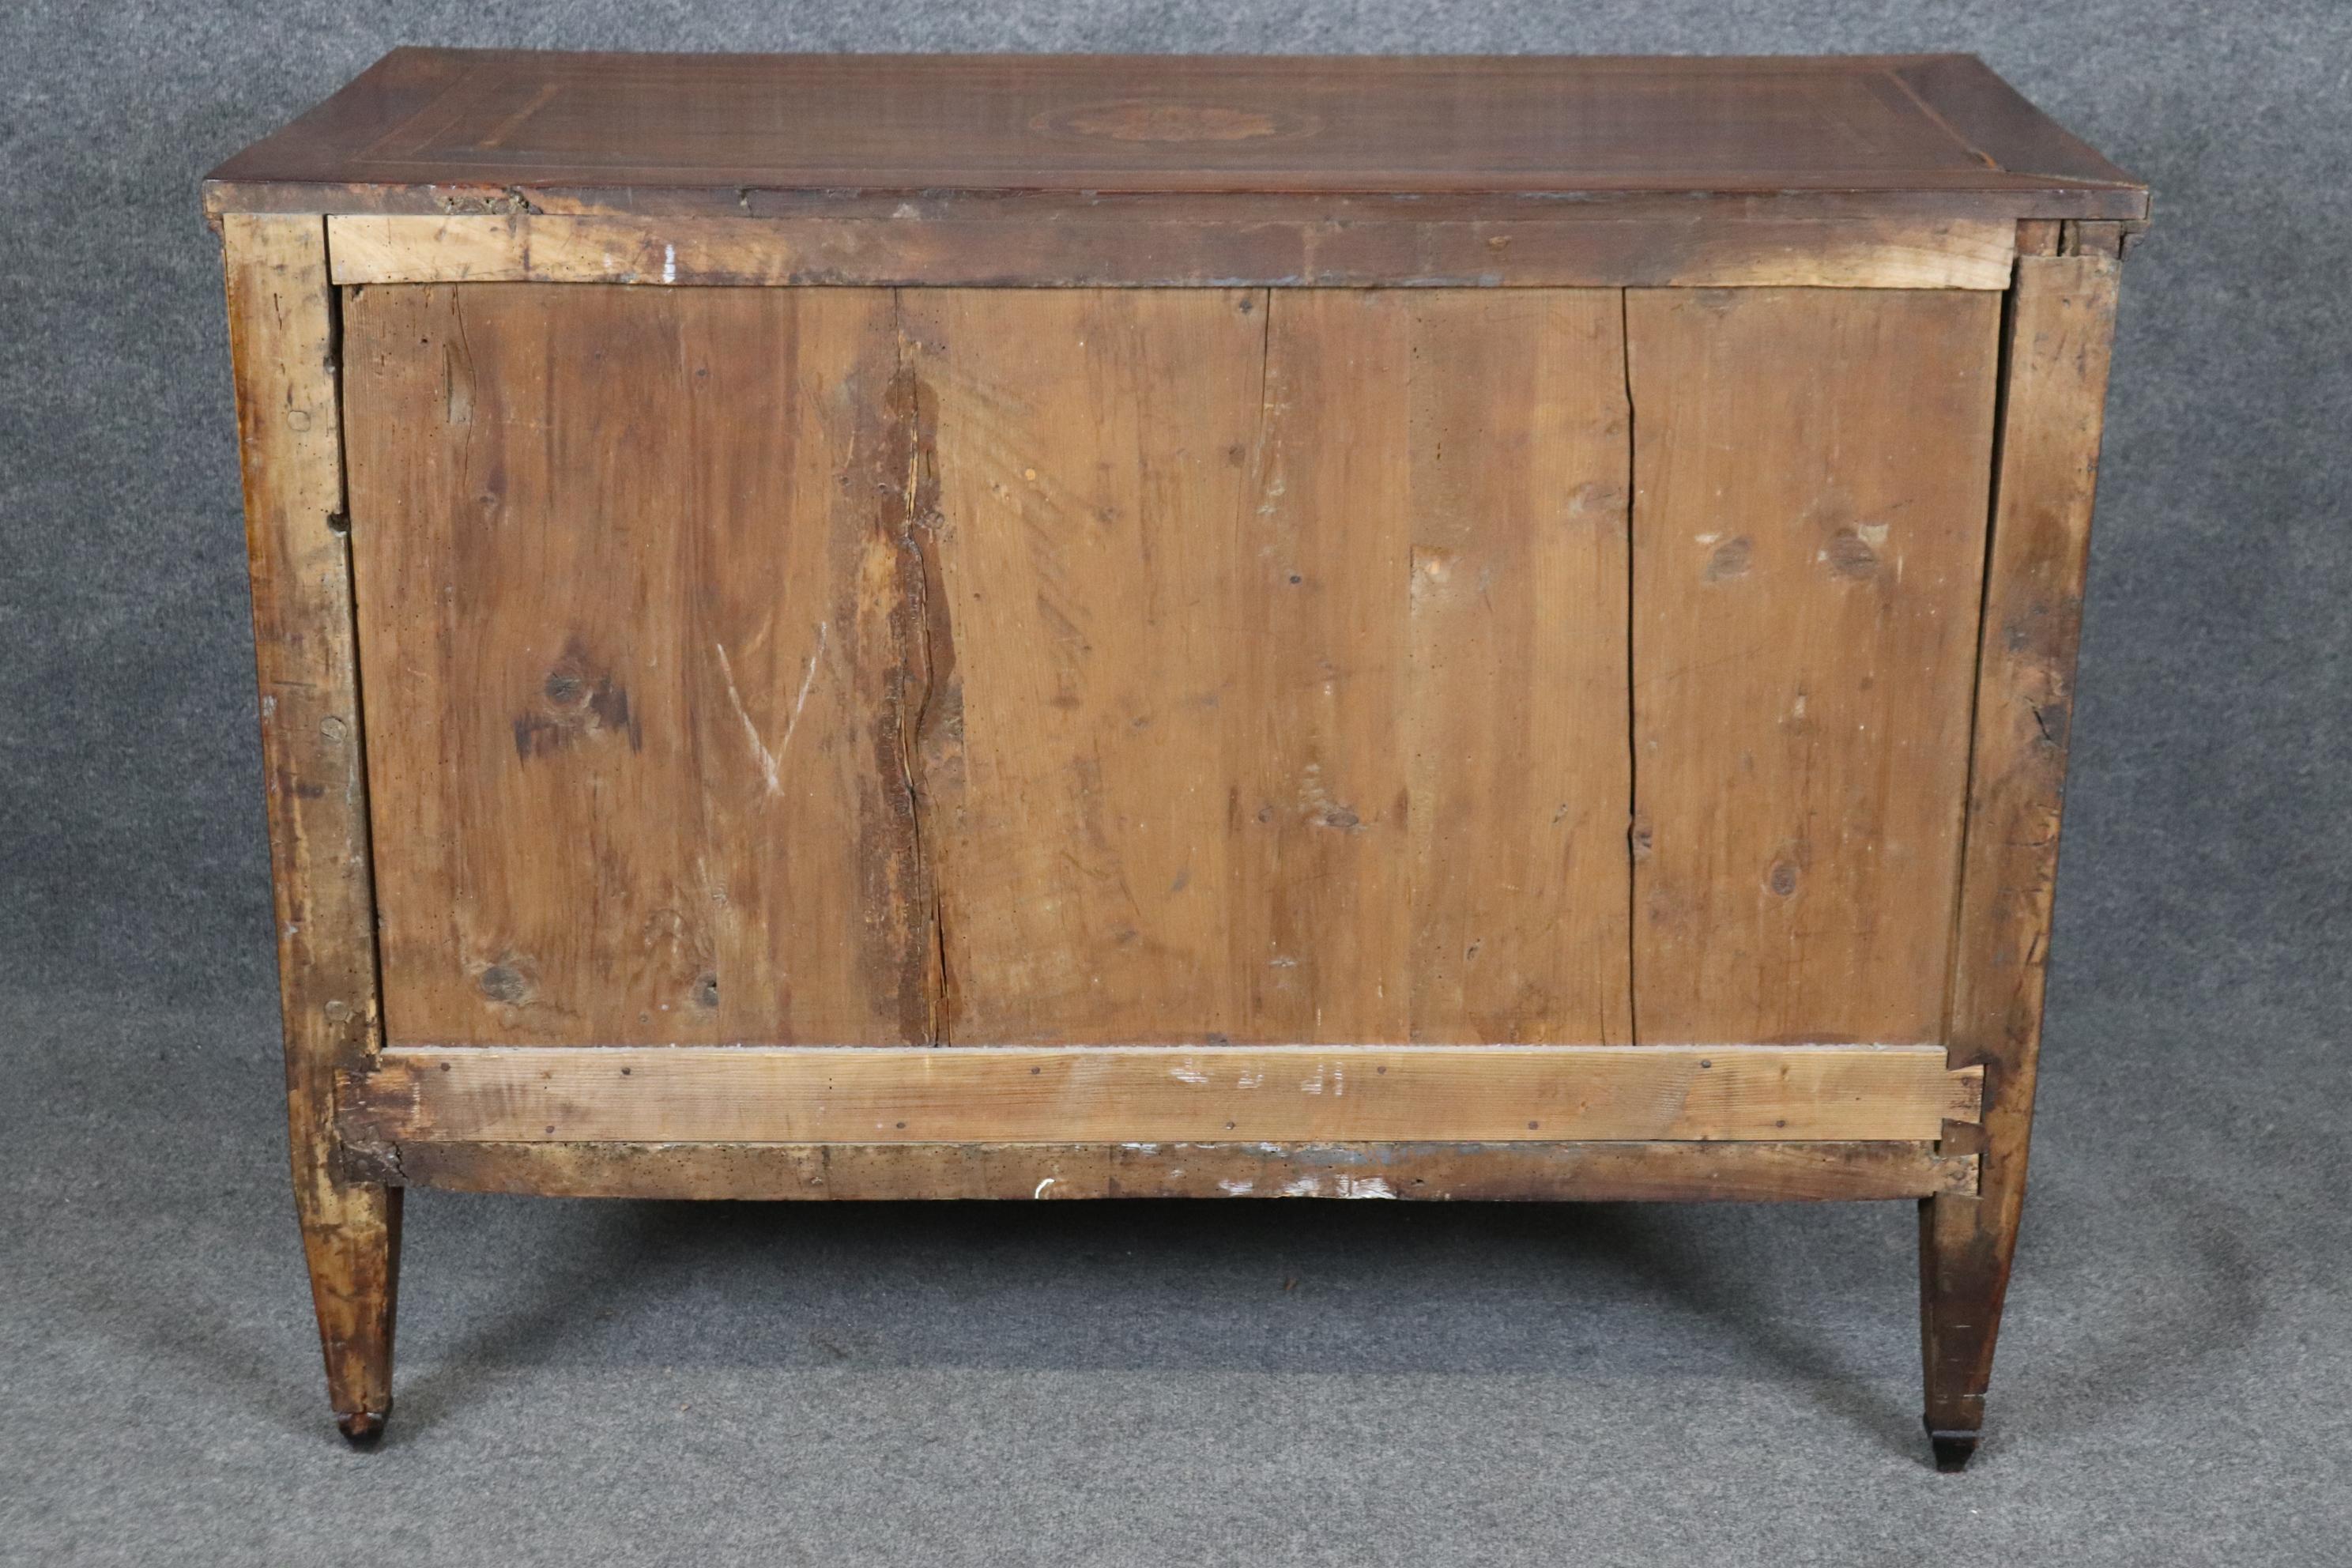 This is a rare find indeed. The piece shown here is a much higher form of Italian-made commode than most we see or have and has the hottest styling of those days in Europe- French Directoire. The commode is covered in gorgeous flame walnut veneer